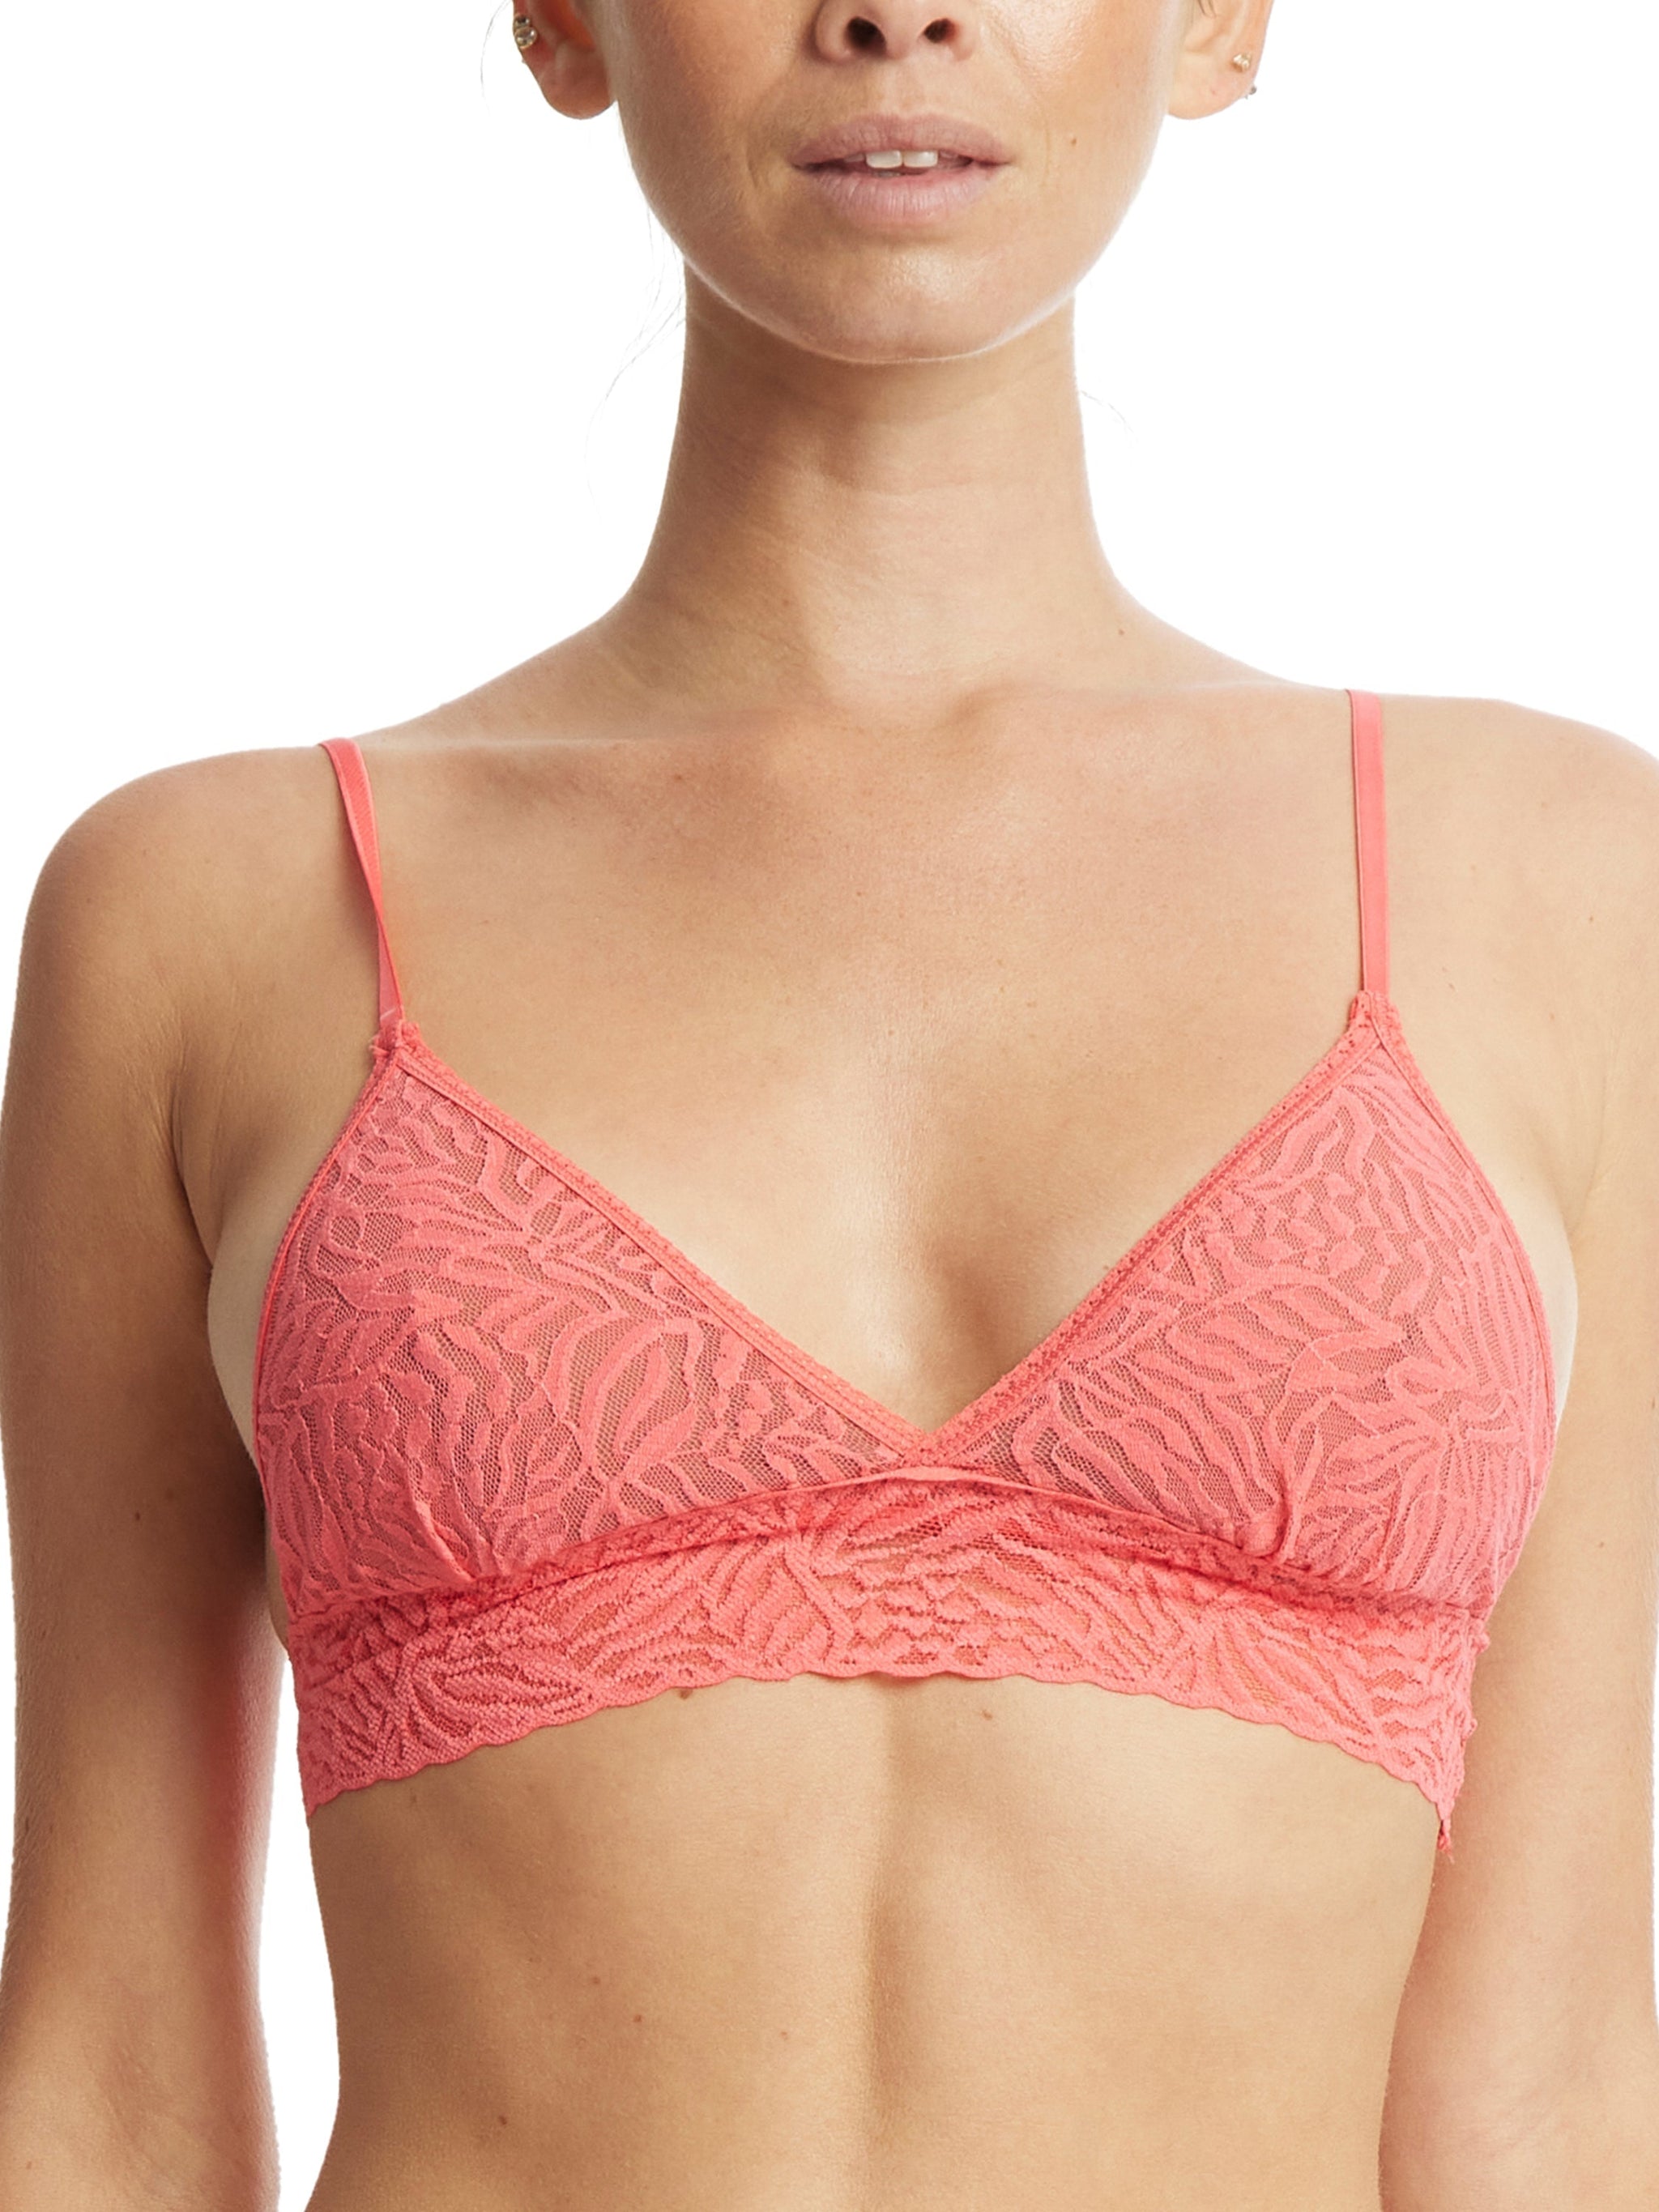 Bras and Tops Products